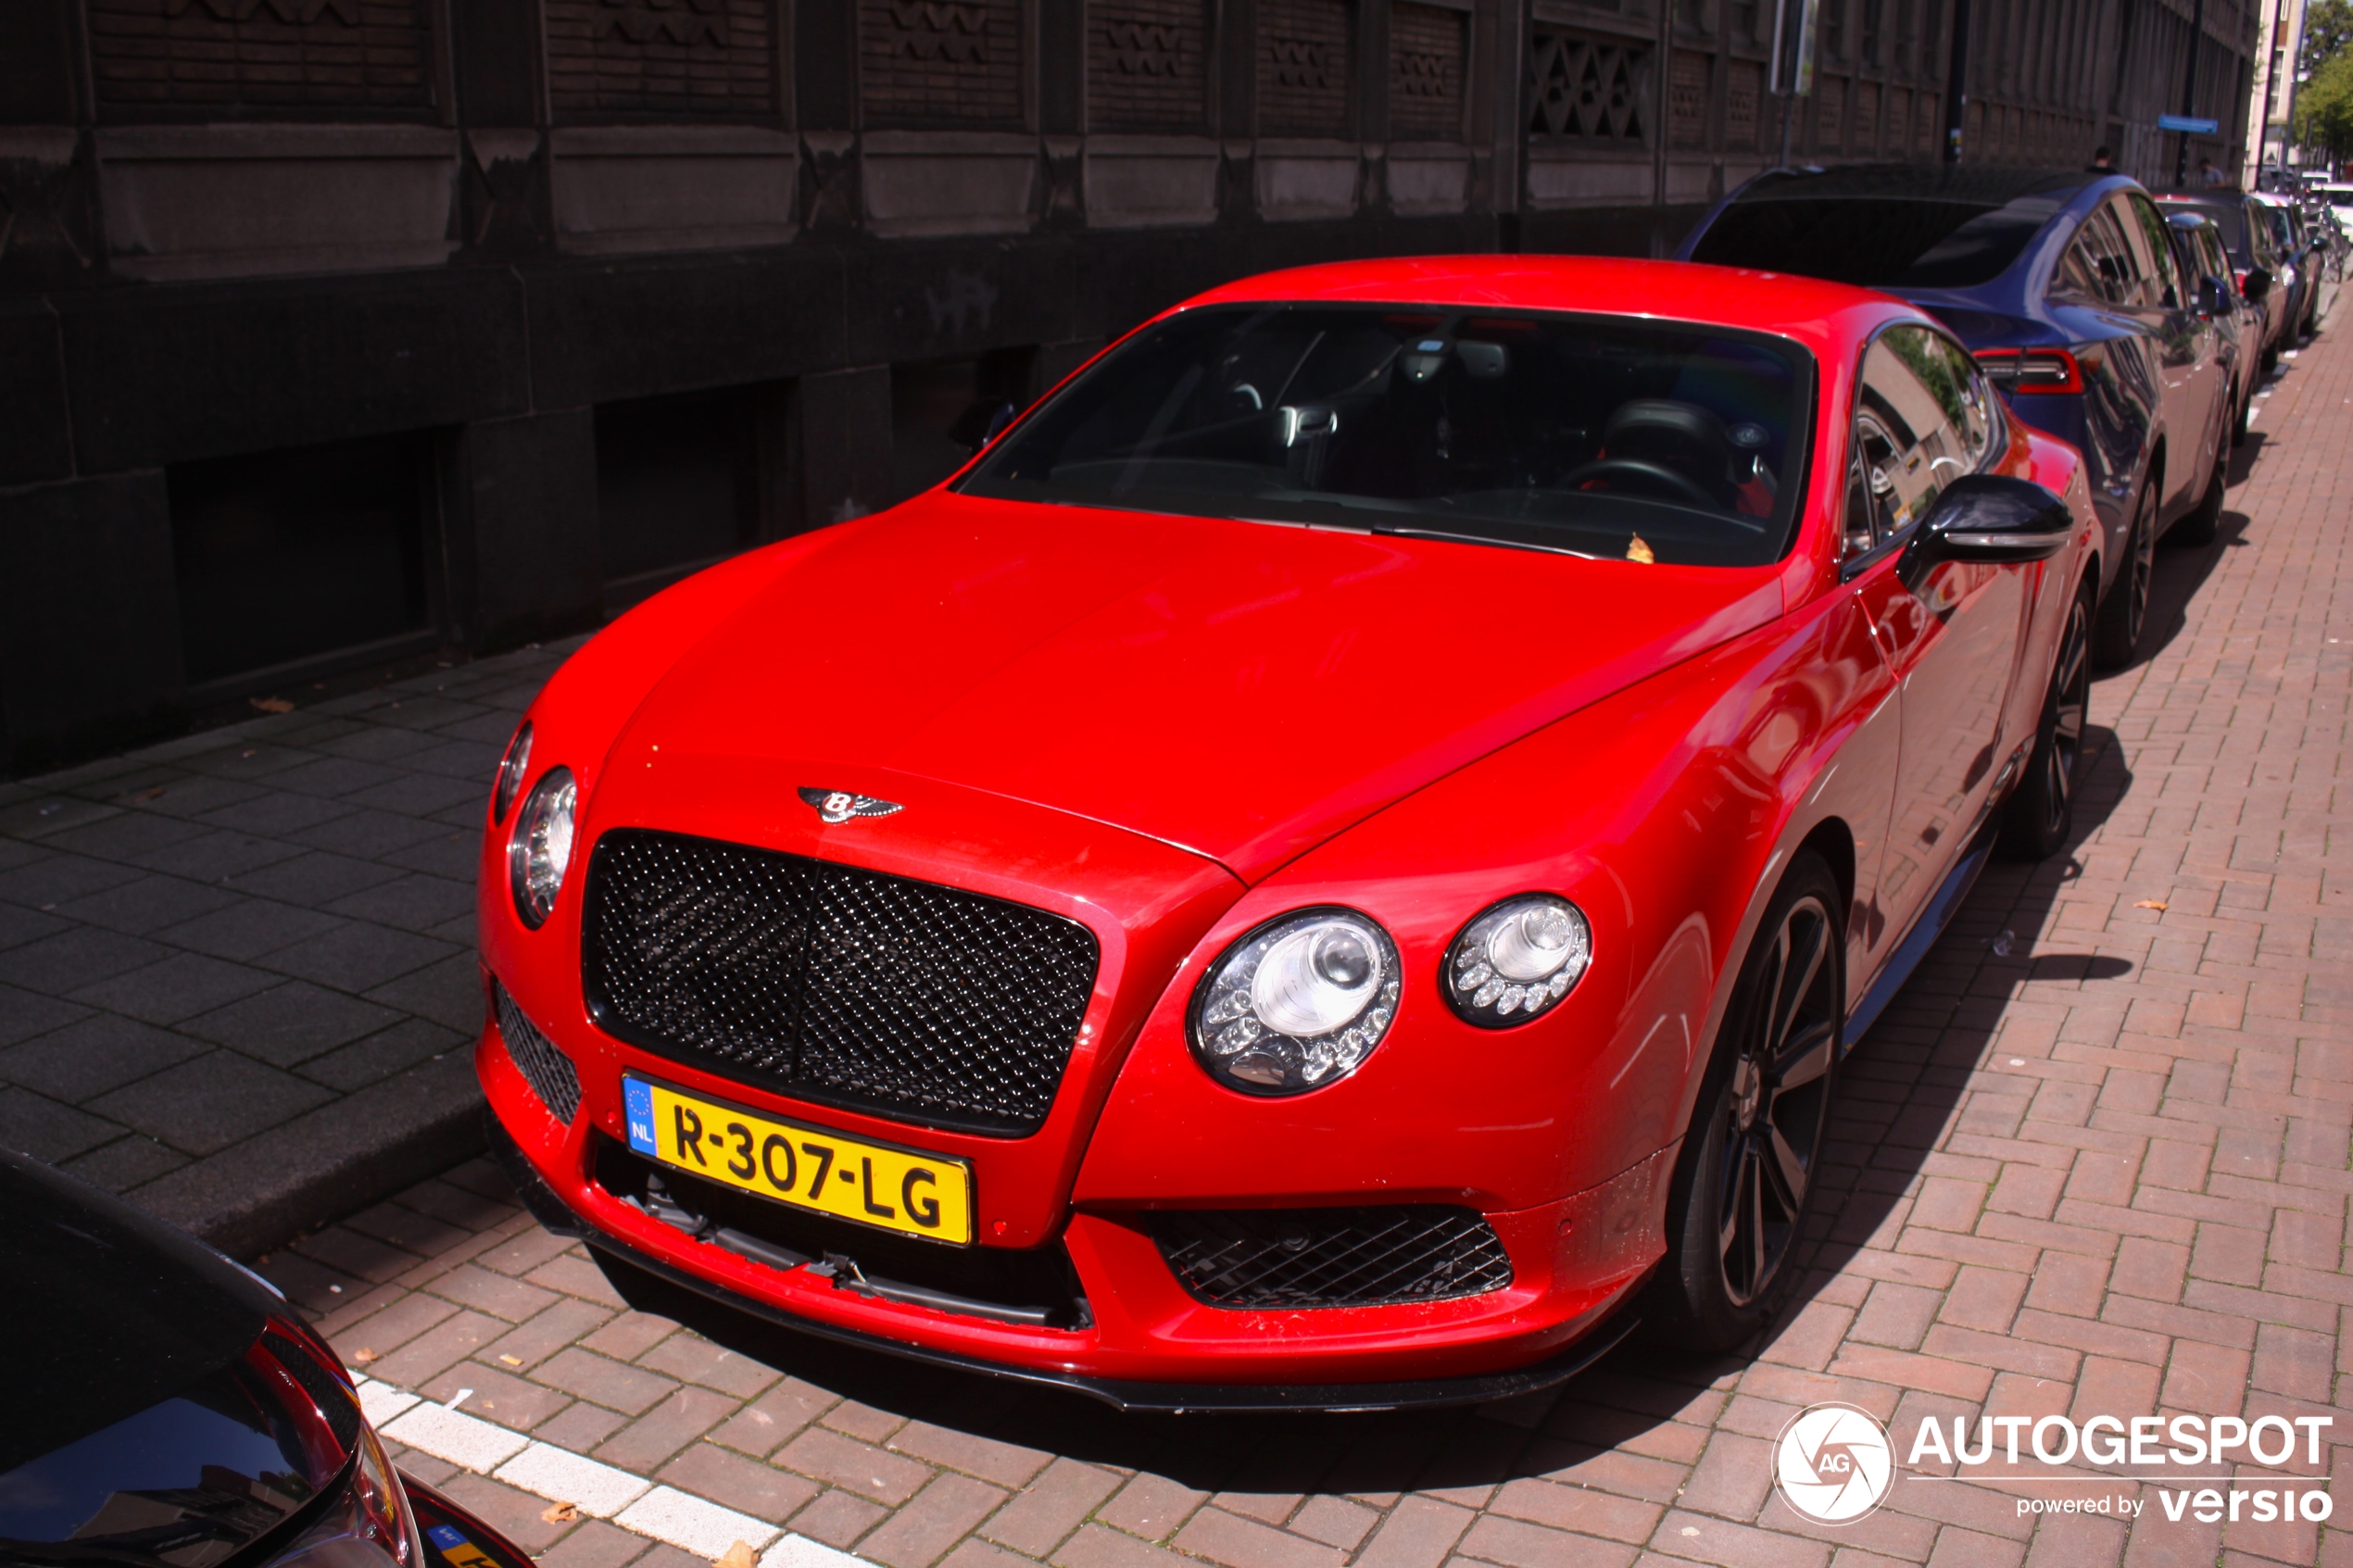 Bentley Continental GT V8 S Concours Series Black